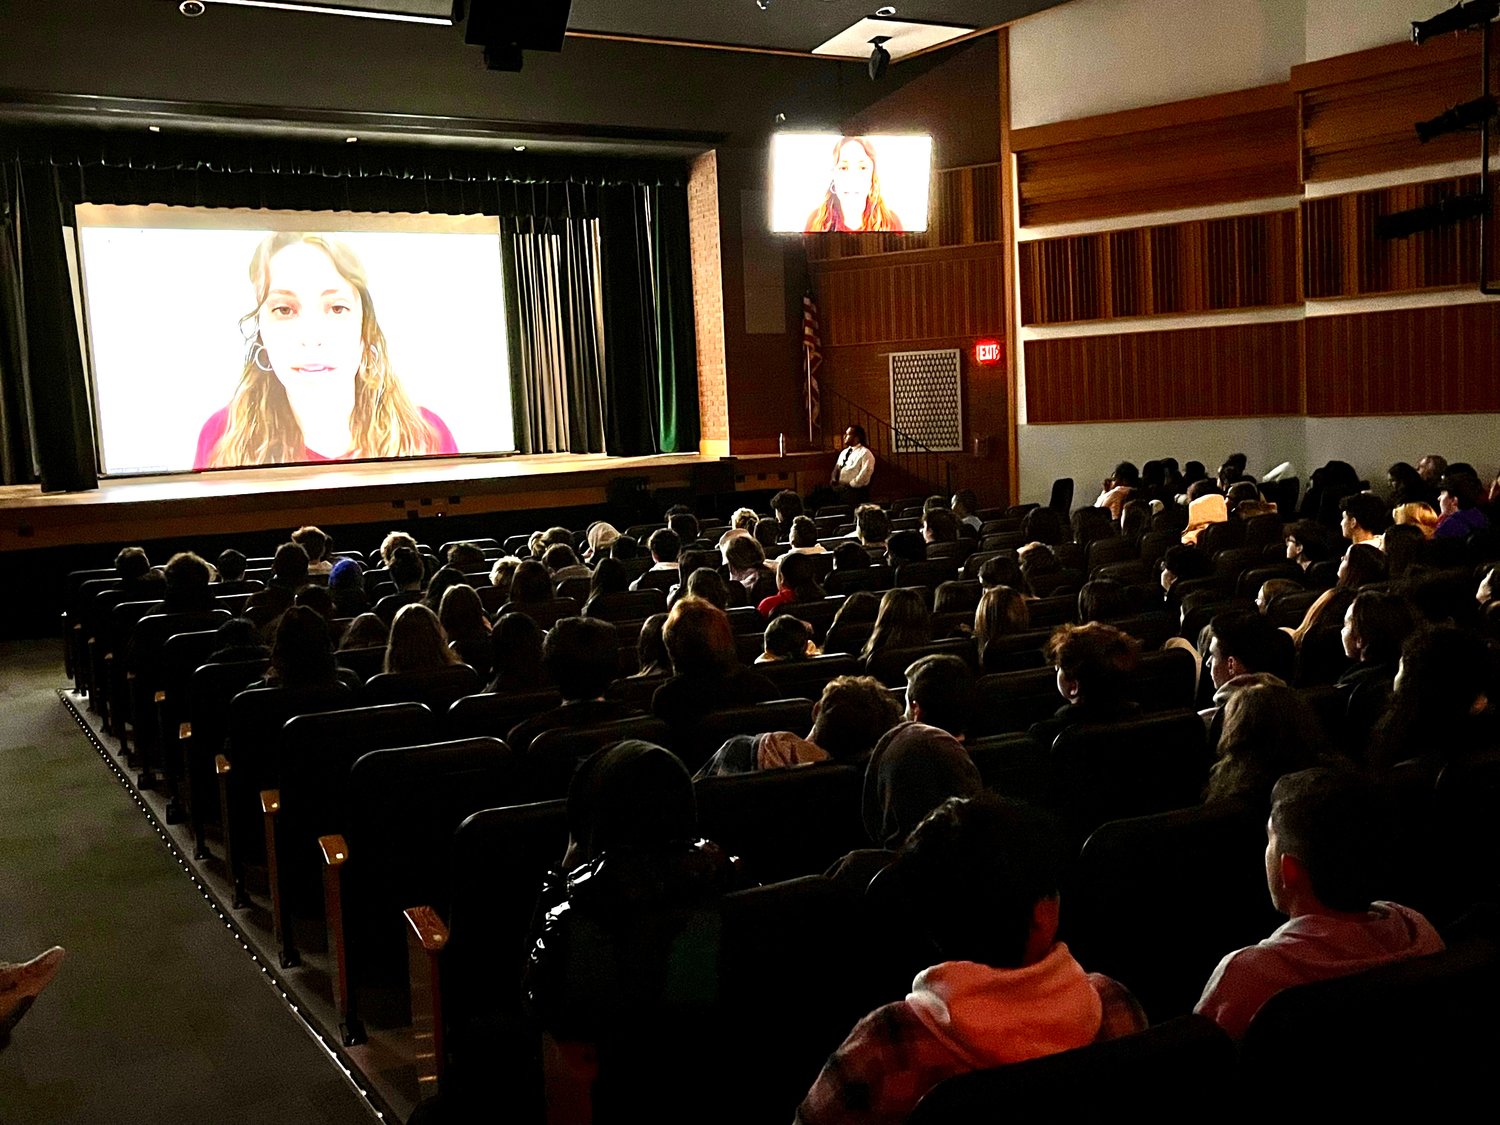 Students from schools across the country gathered to watch the Holocaust documentary presented by NCJW-Peninsula section.